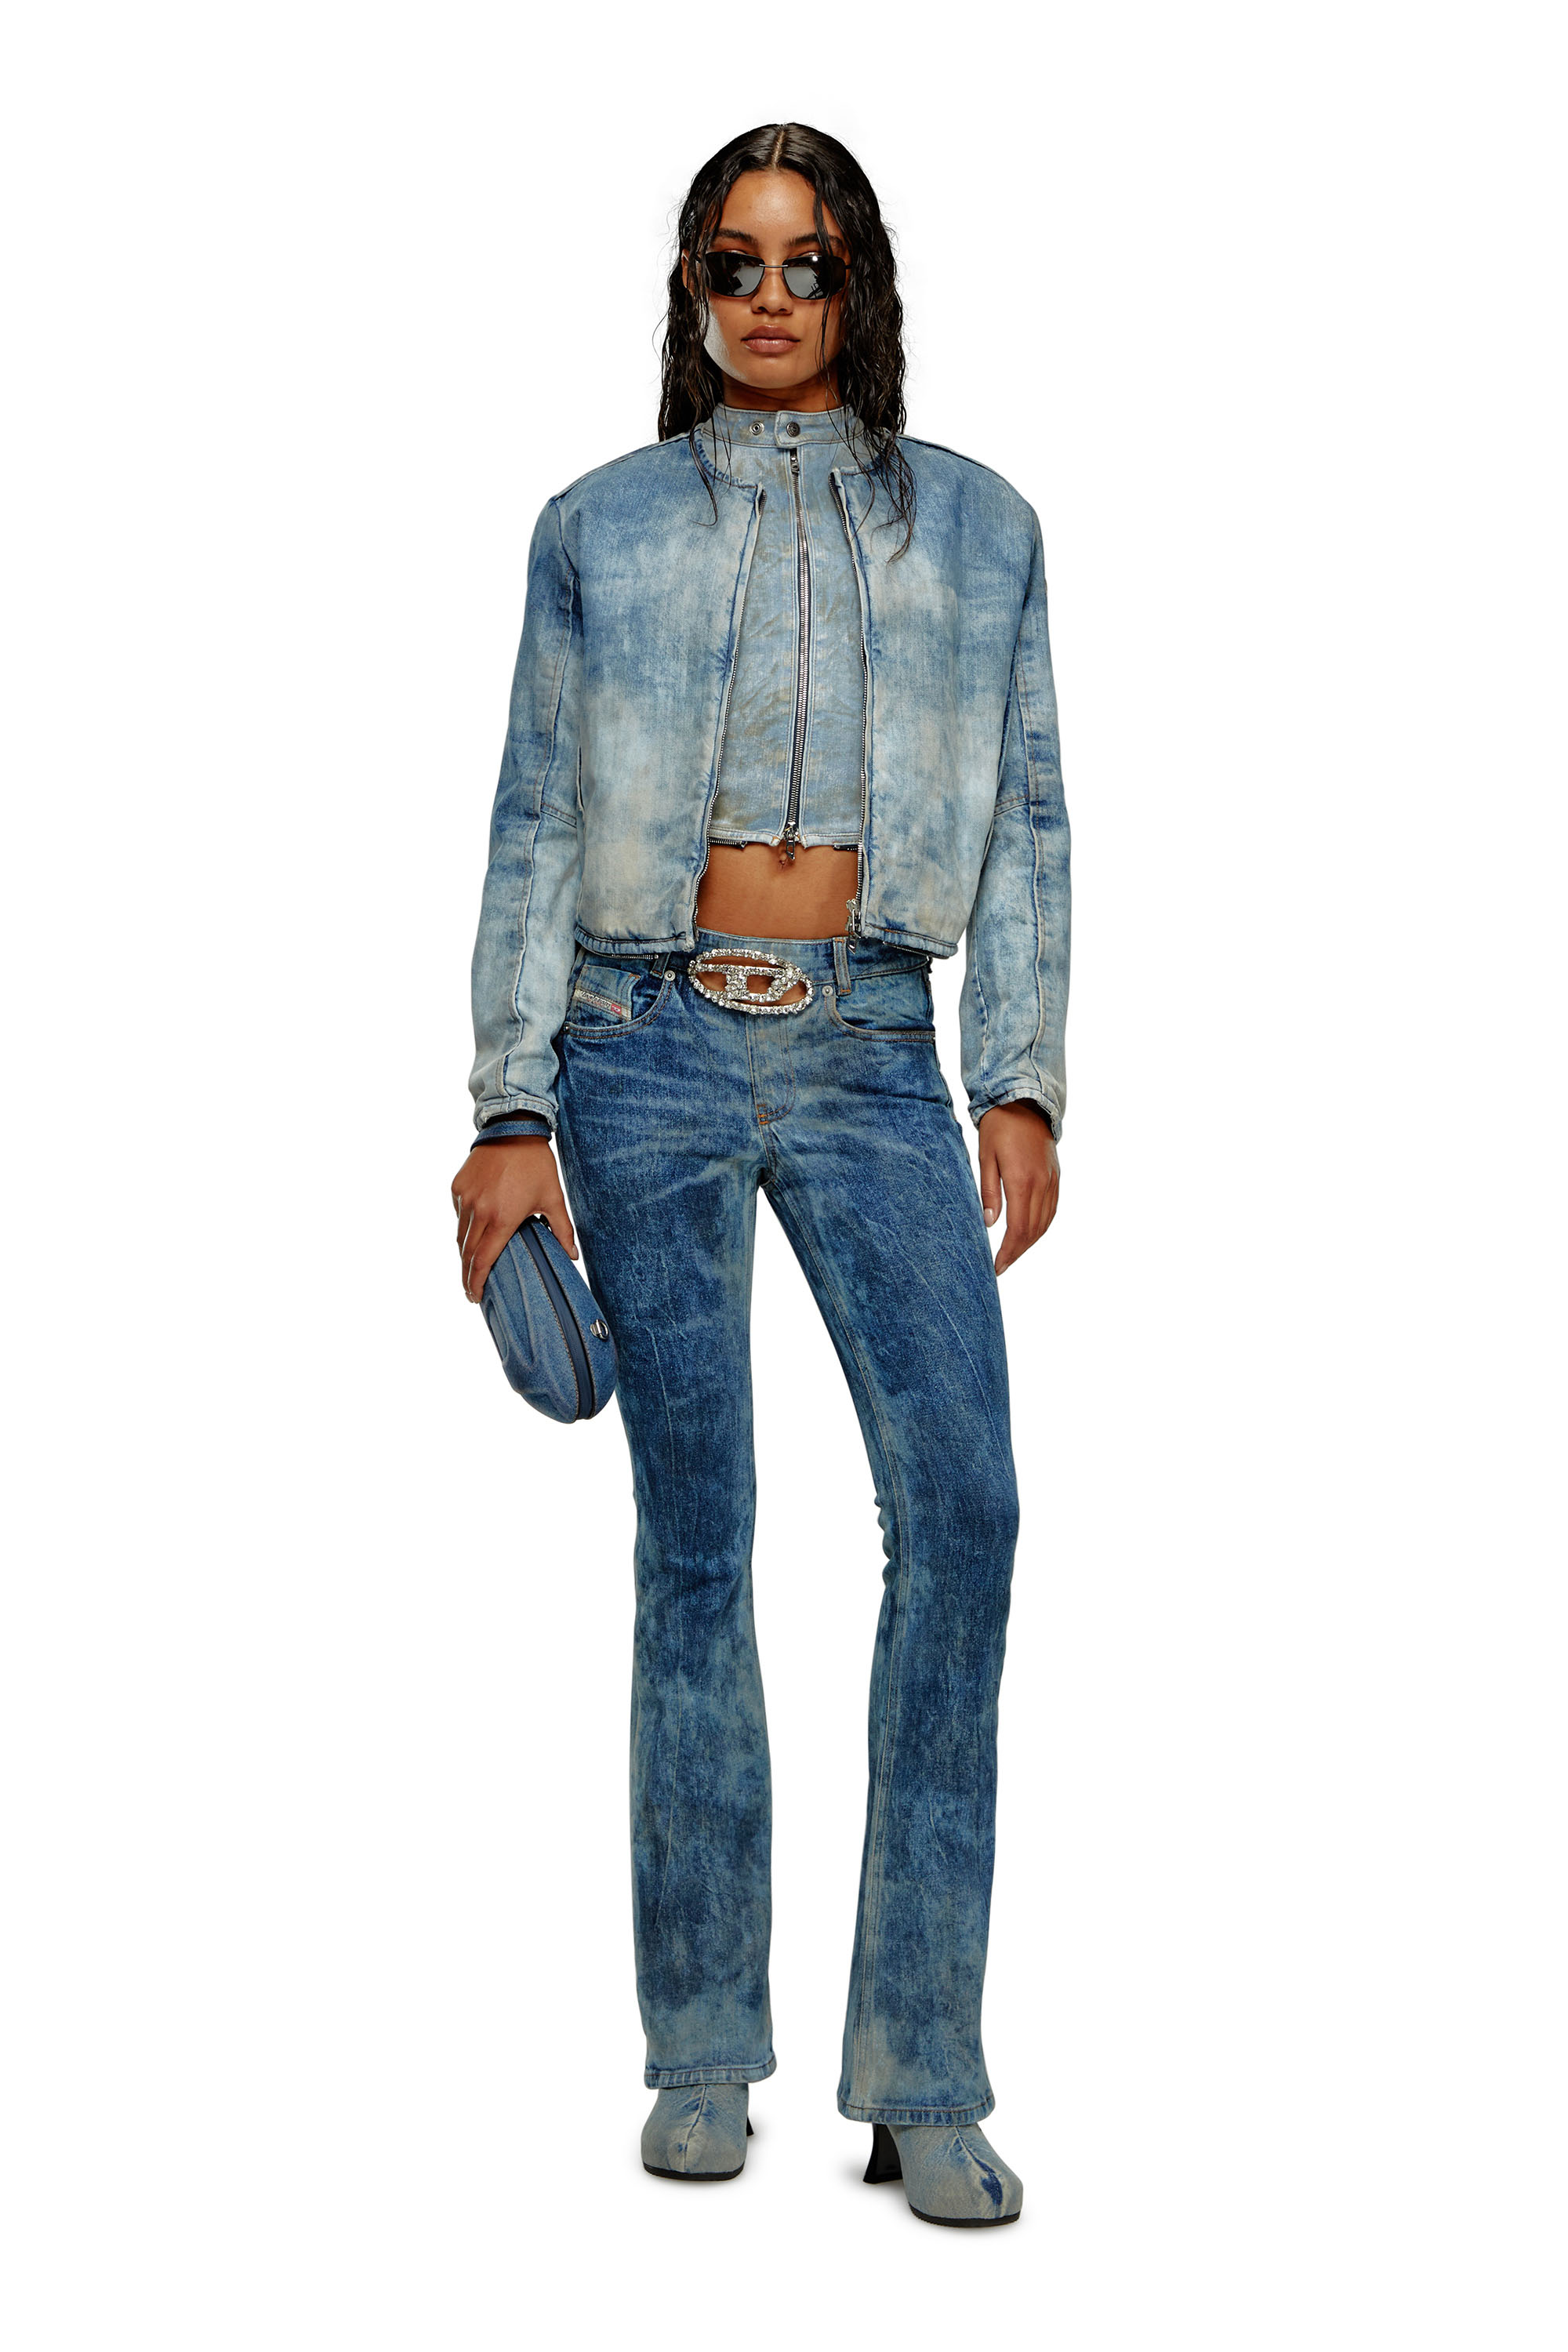 Diesel - Bootcut and Flare Jeans 1969 D-Ebbey 0PGAL, Mujer Bootcut y Flare Jeans - 1969 D-Ebbey in Azul marino - Image 1